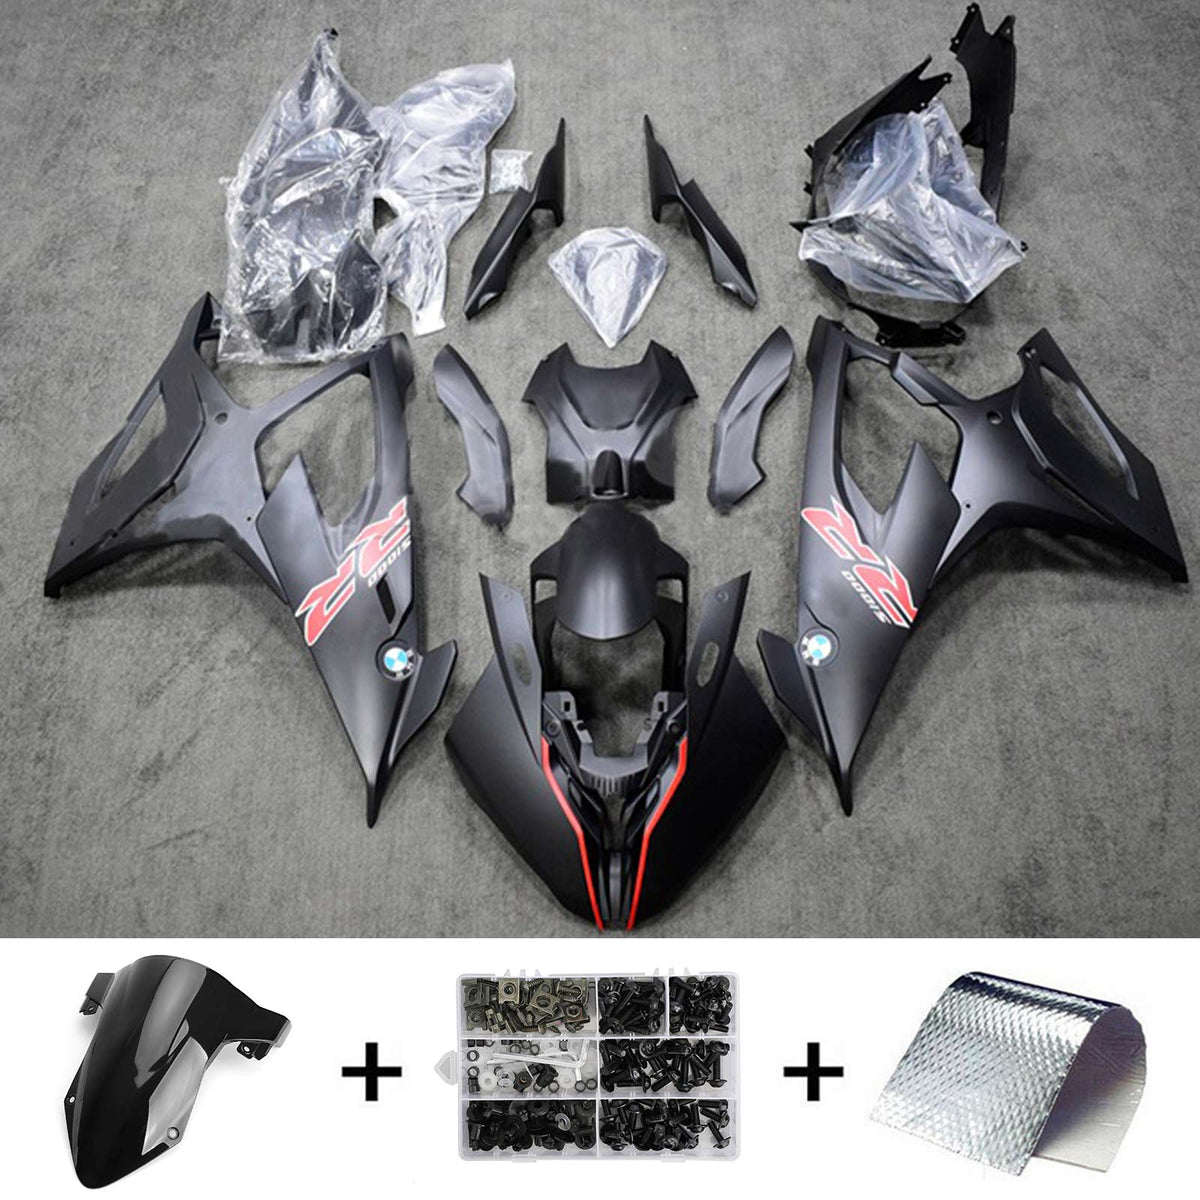 Amotopart 2019-2022 Kit carena BMW S1000RR/M1000RR Nero Red Line Racing